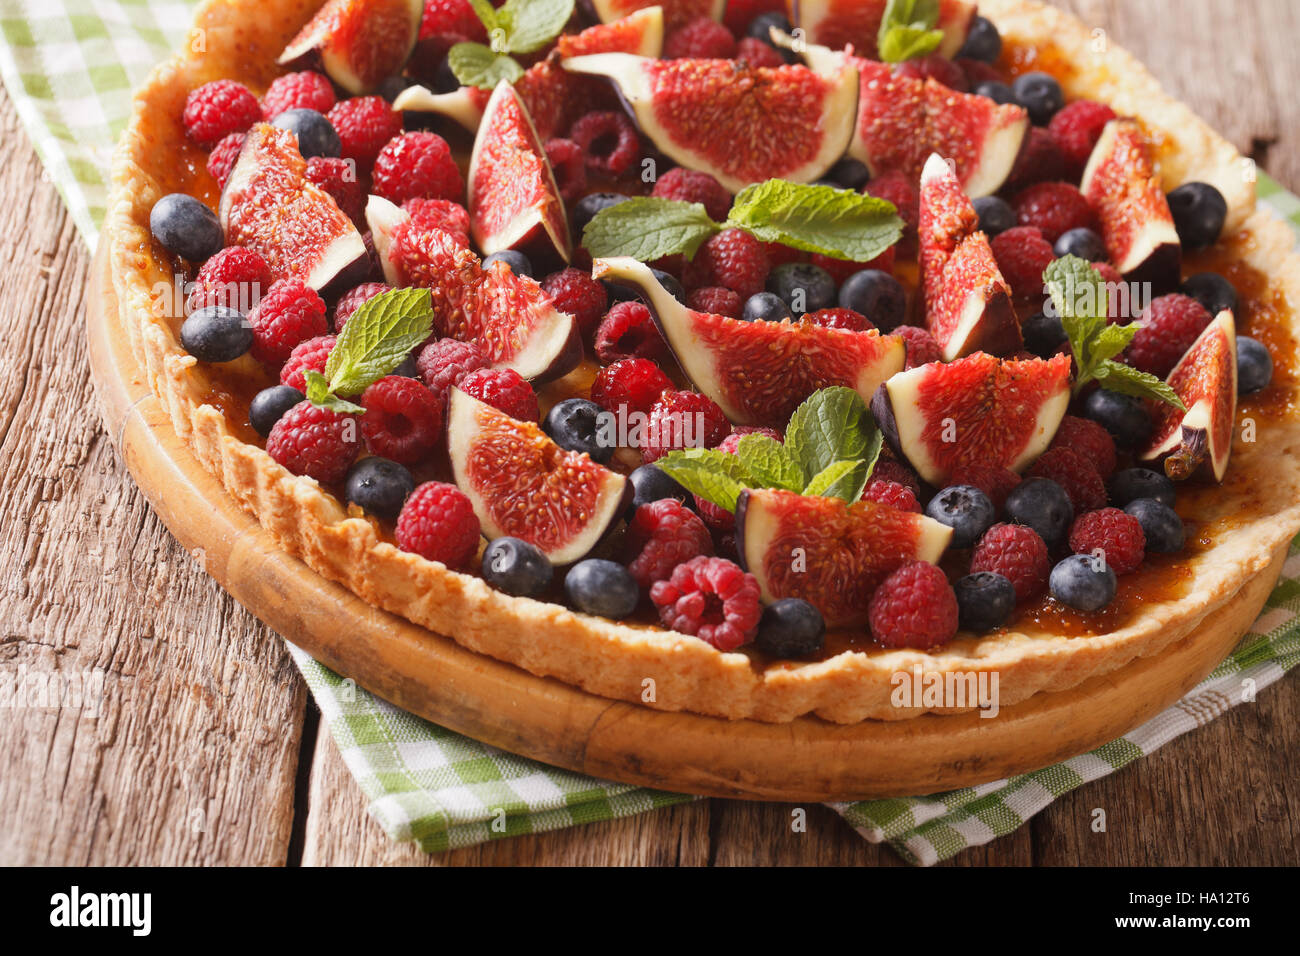 Delicious pastry: tart with fresh figs, raspberries and blueberries close-up on the table. horizontal Stock Photo